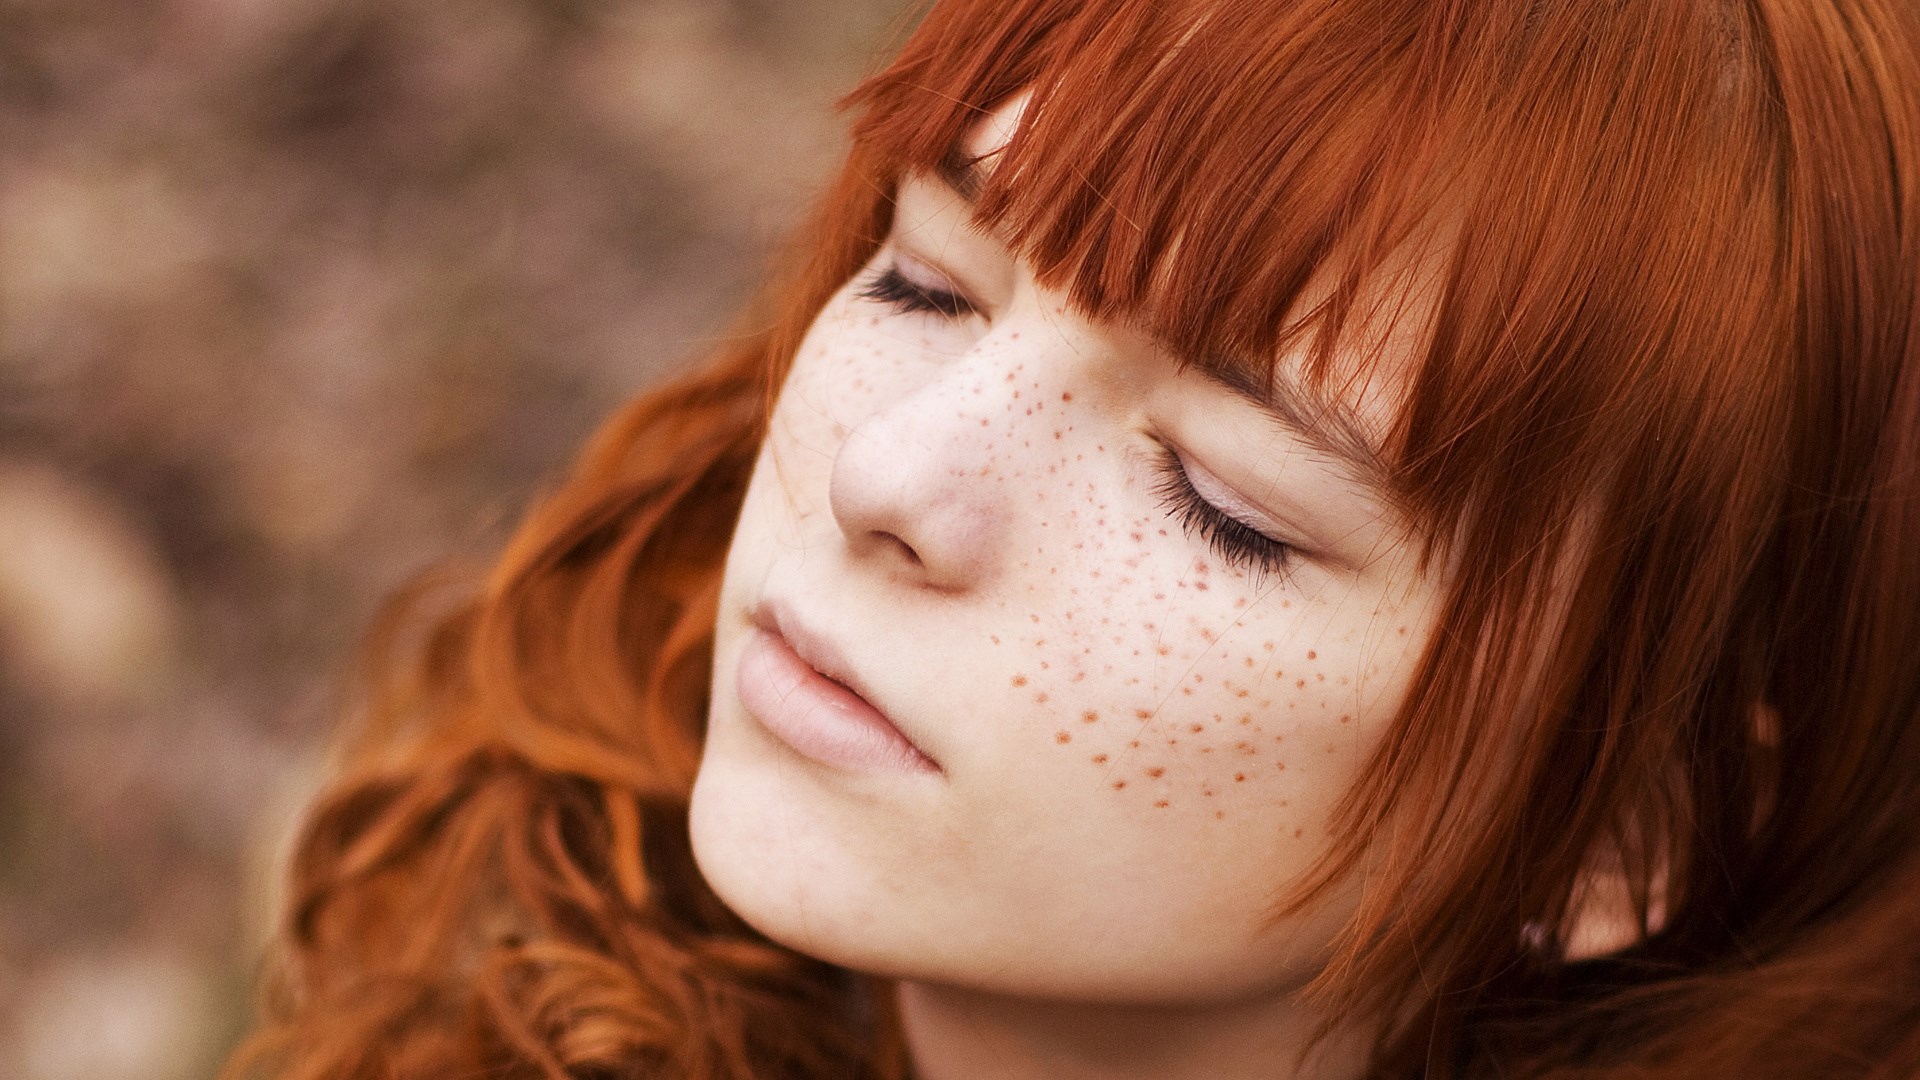 Redhead Girl with Freckles